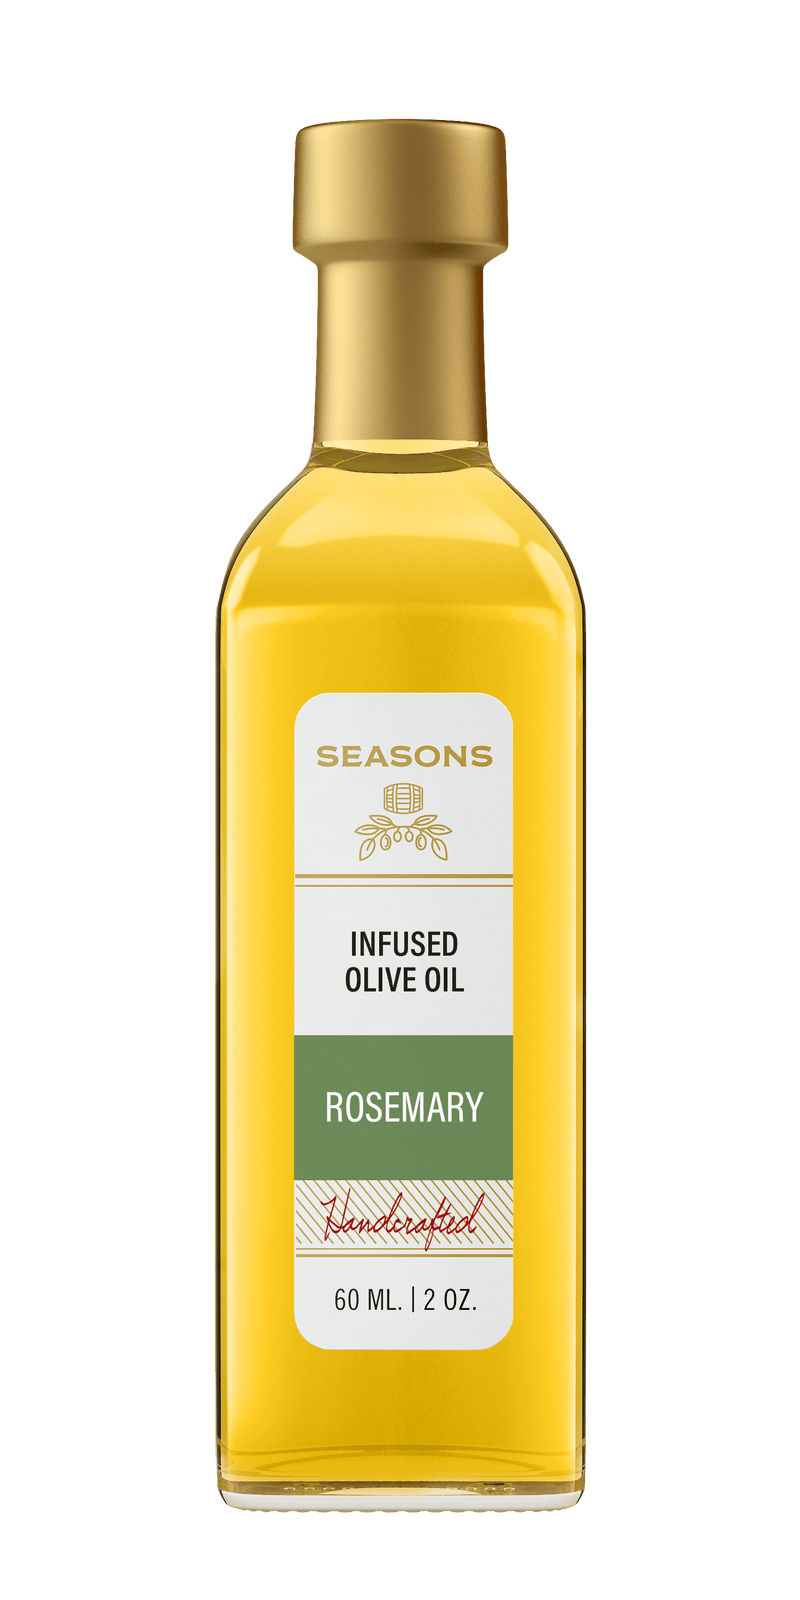 Millpress Imports Infused Olive Oil Rosemary Infused Olive Oil